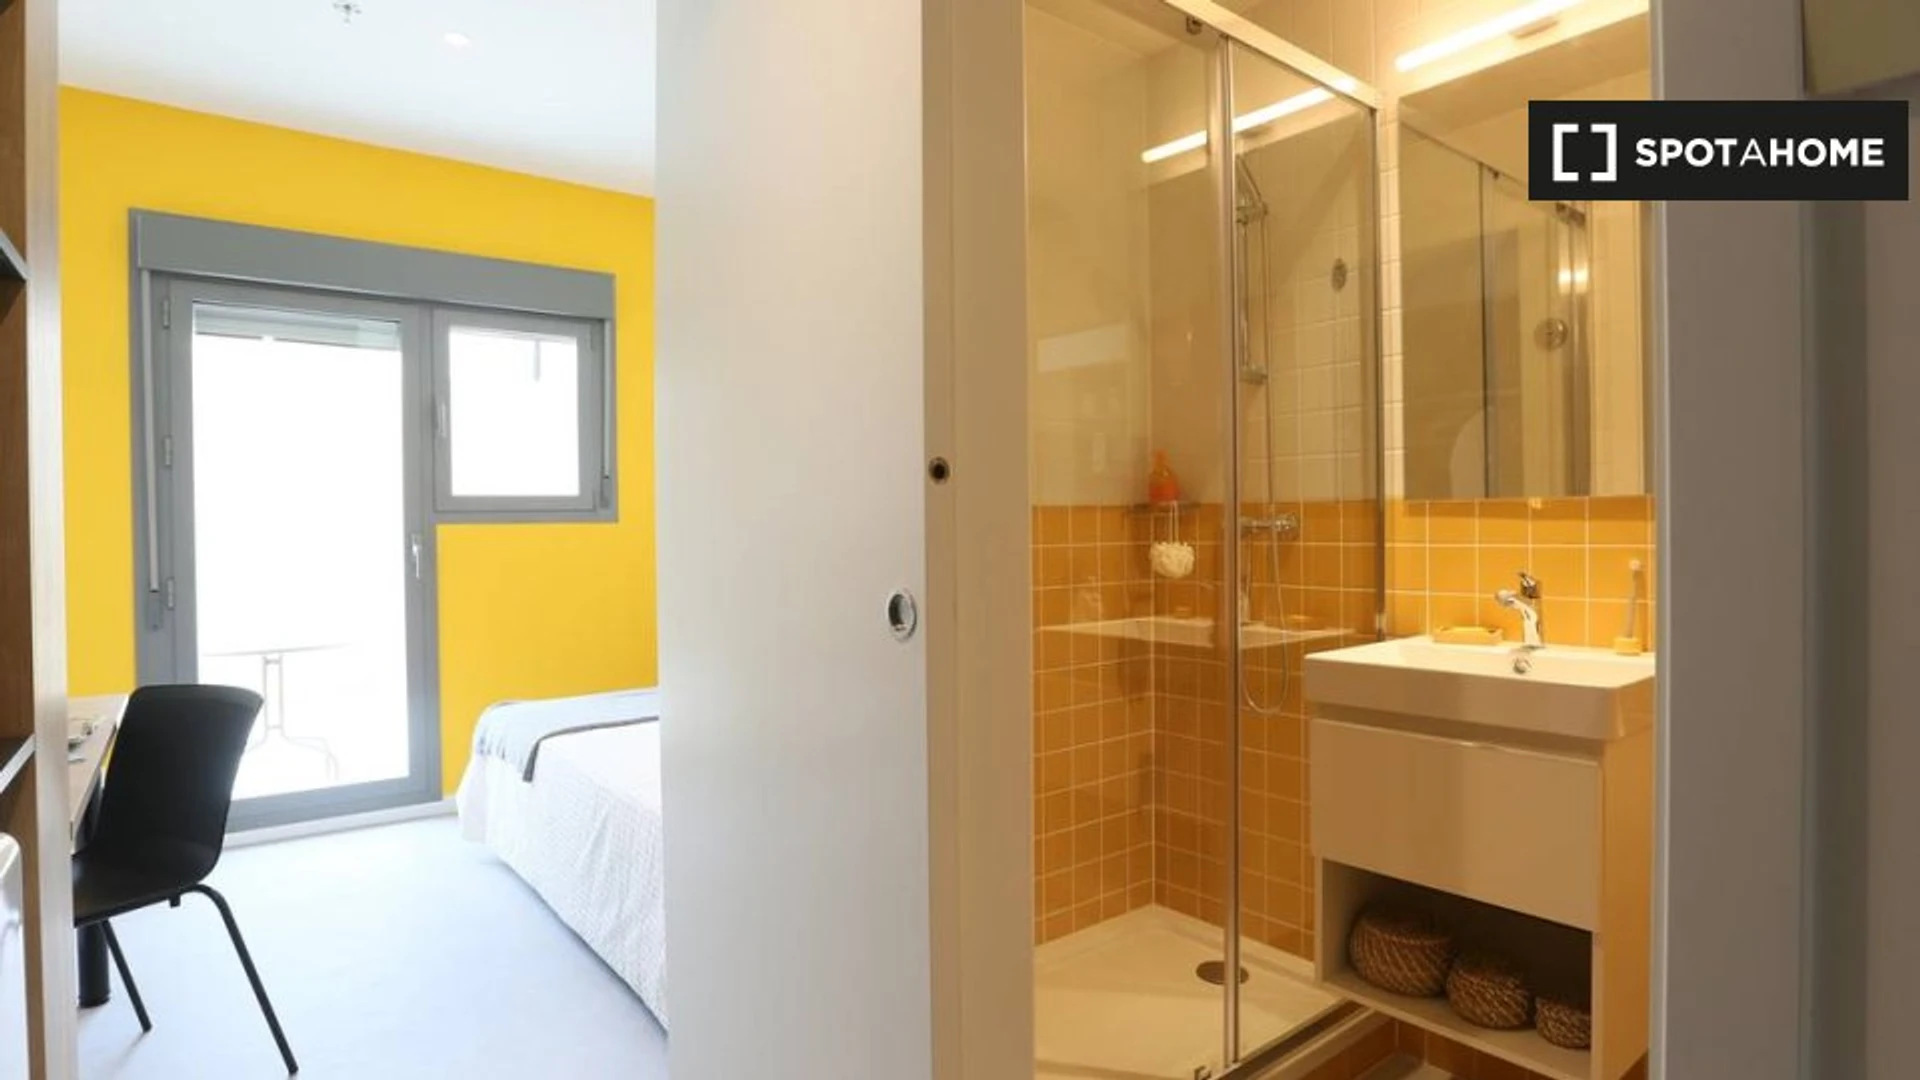 Renting rooms by the month in Seville